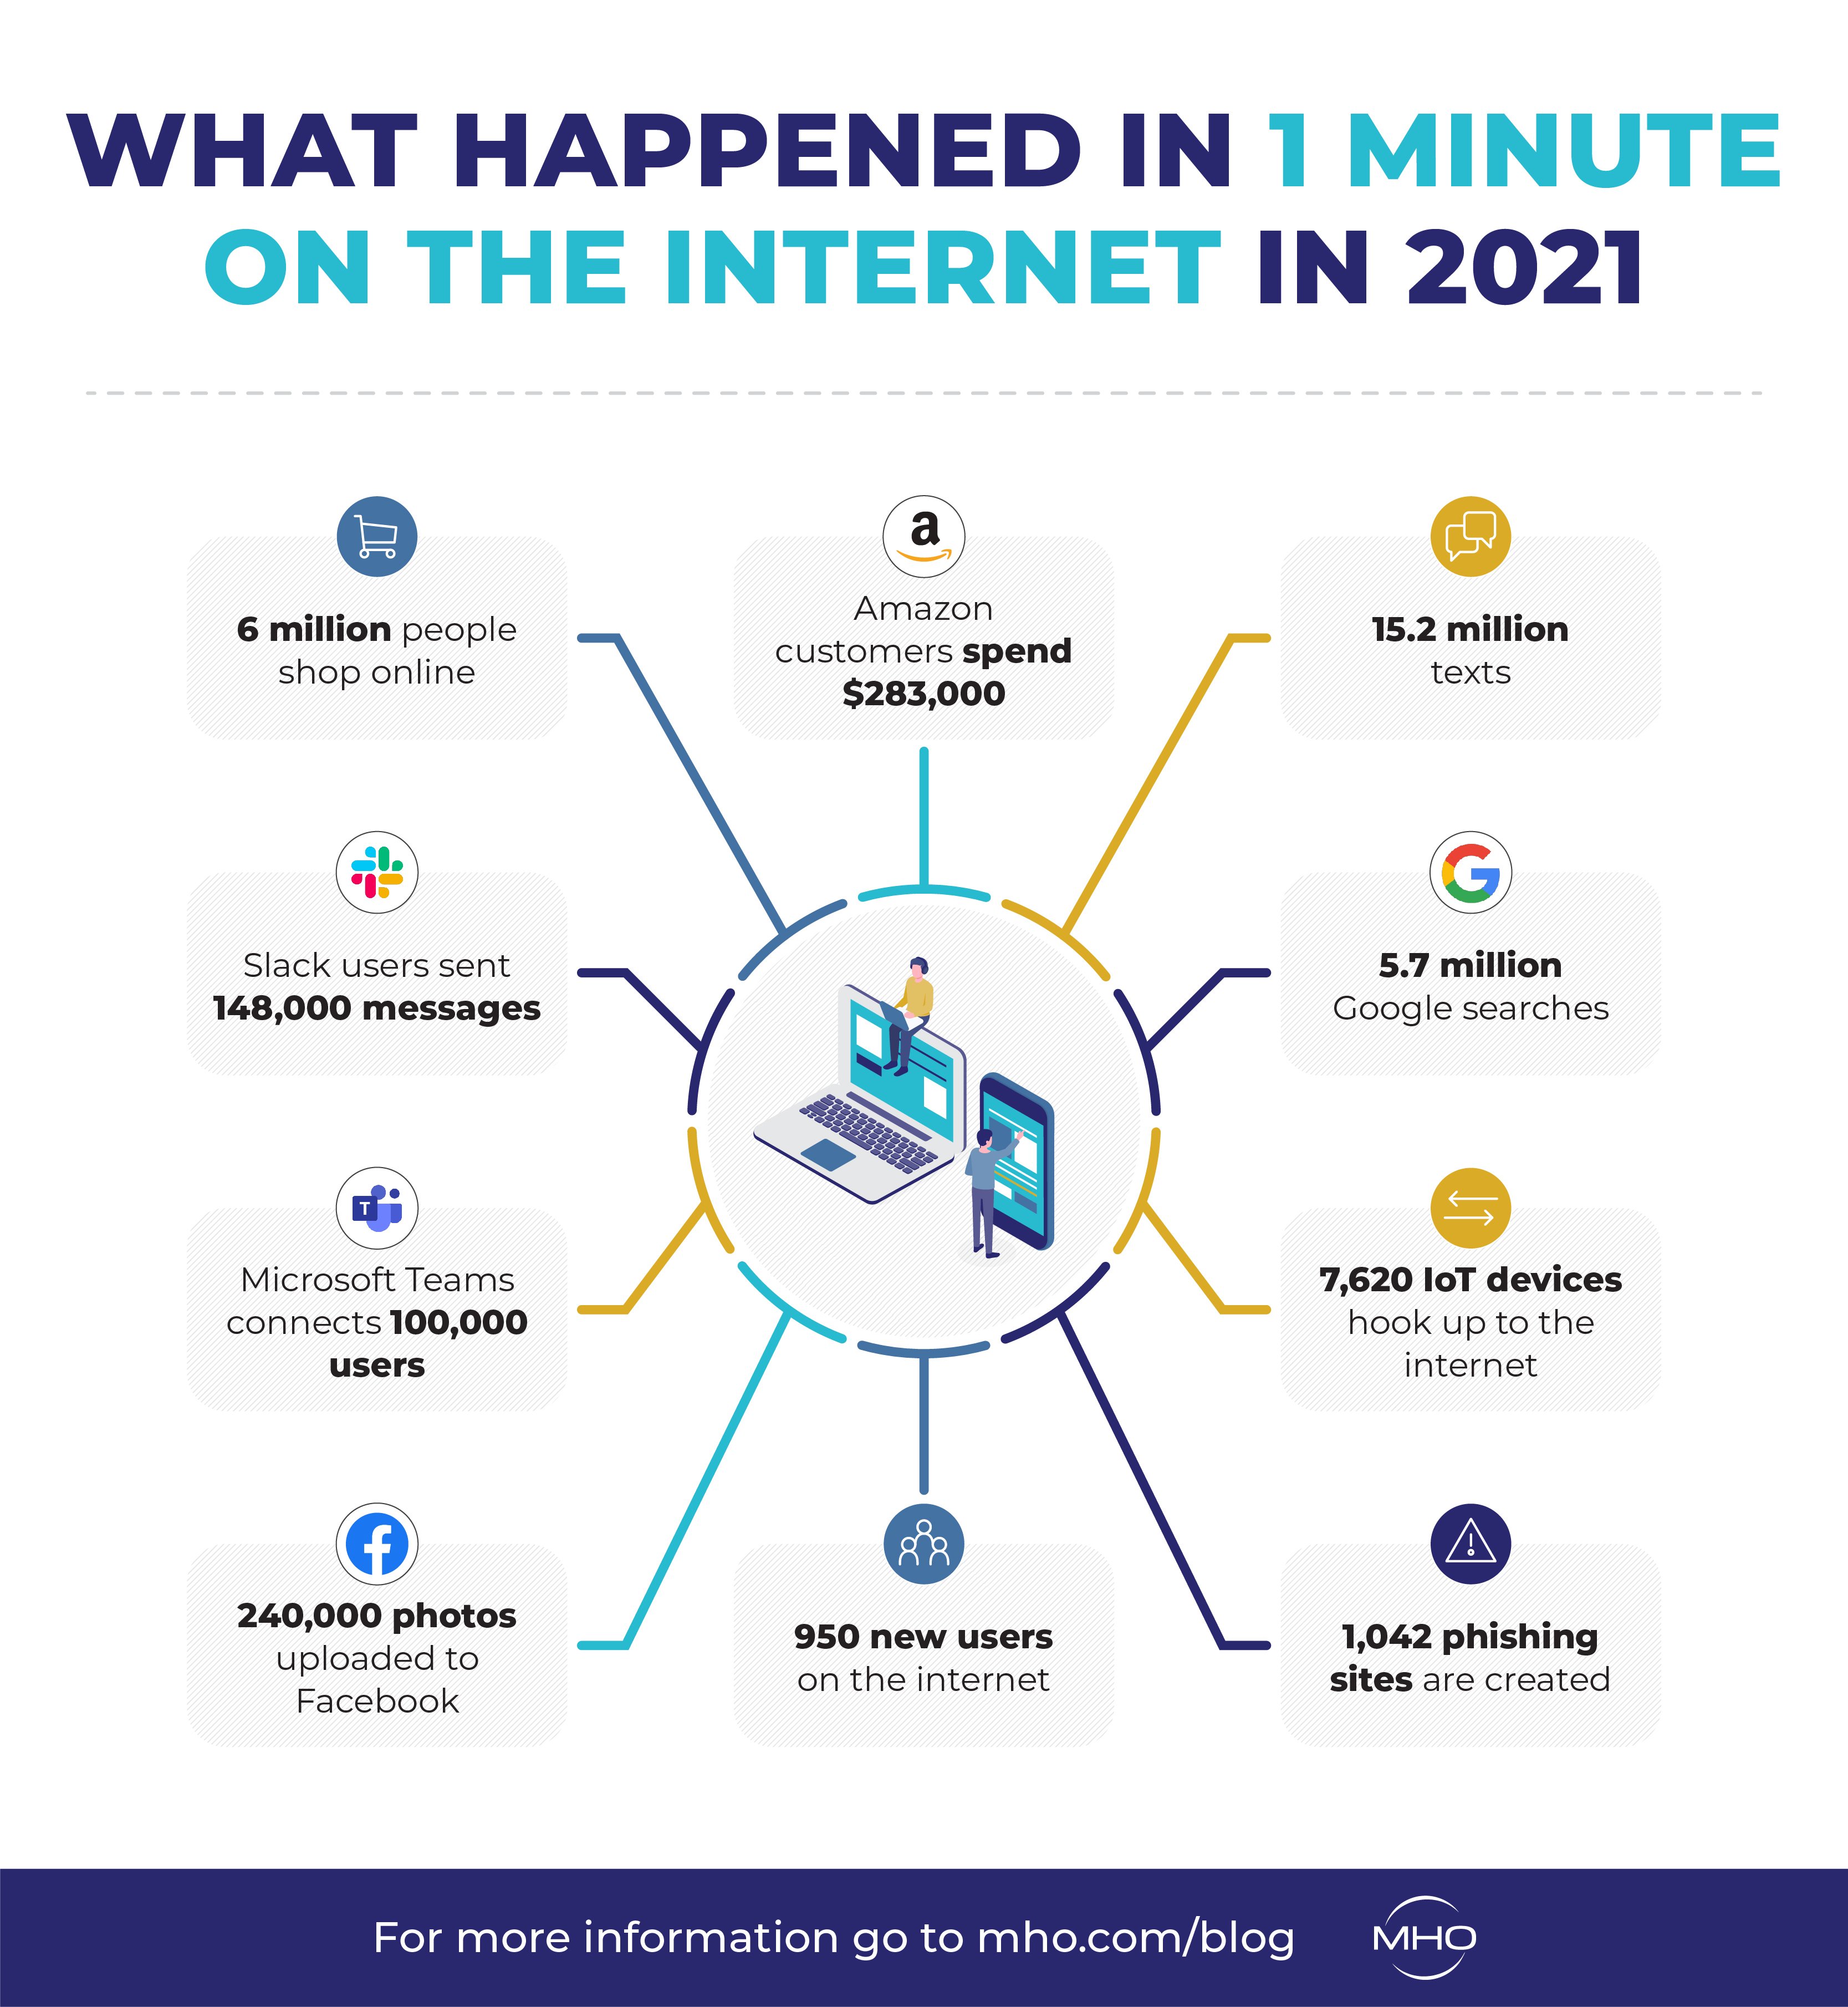 What happened in 1 minute on the internet in 2021